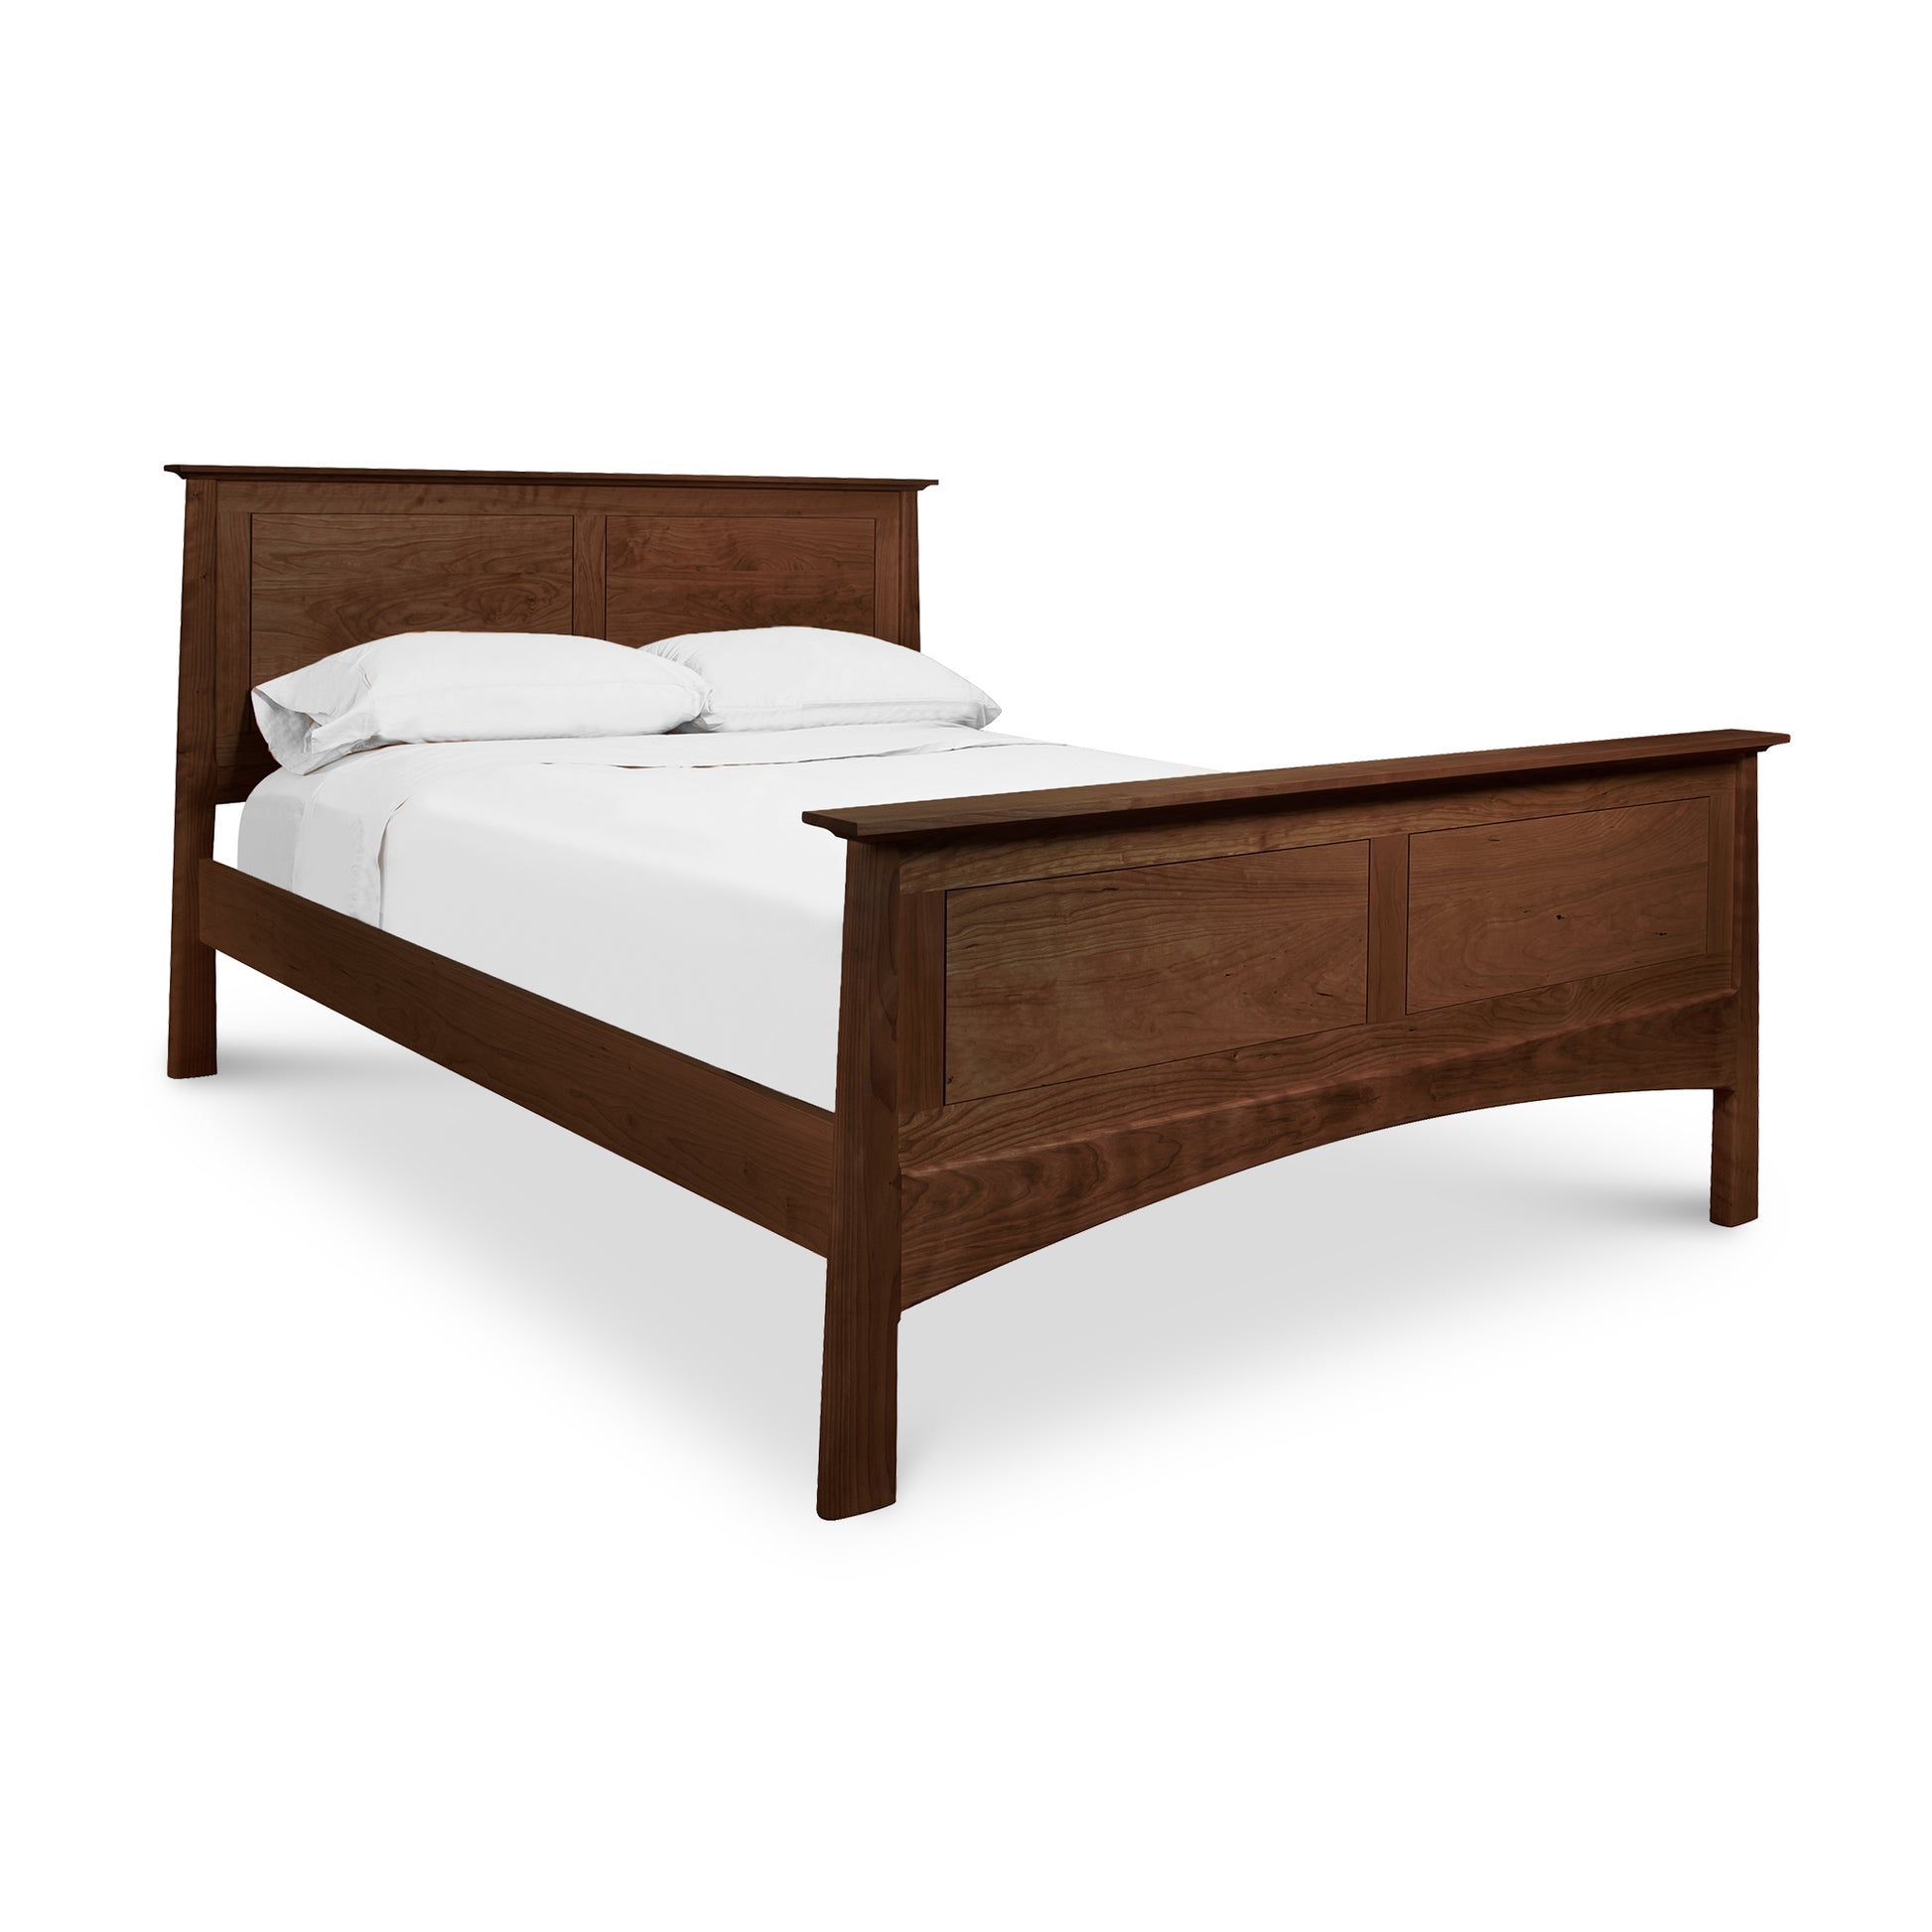 A Maple Corner Woodworks Cherry Moon Panel Bed with a prominent headboard and footboard, finished in natural cherry, set against a white background. The bed is made with white bedding.